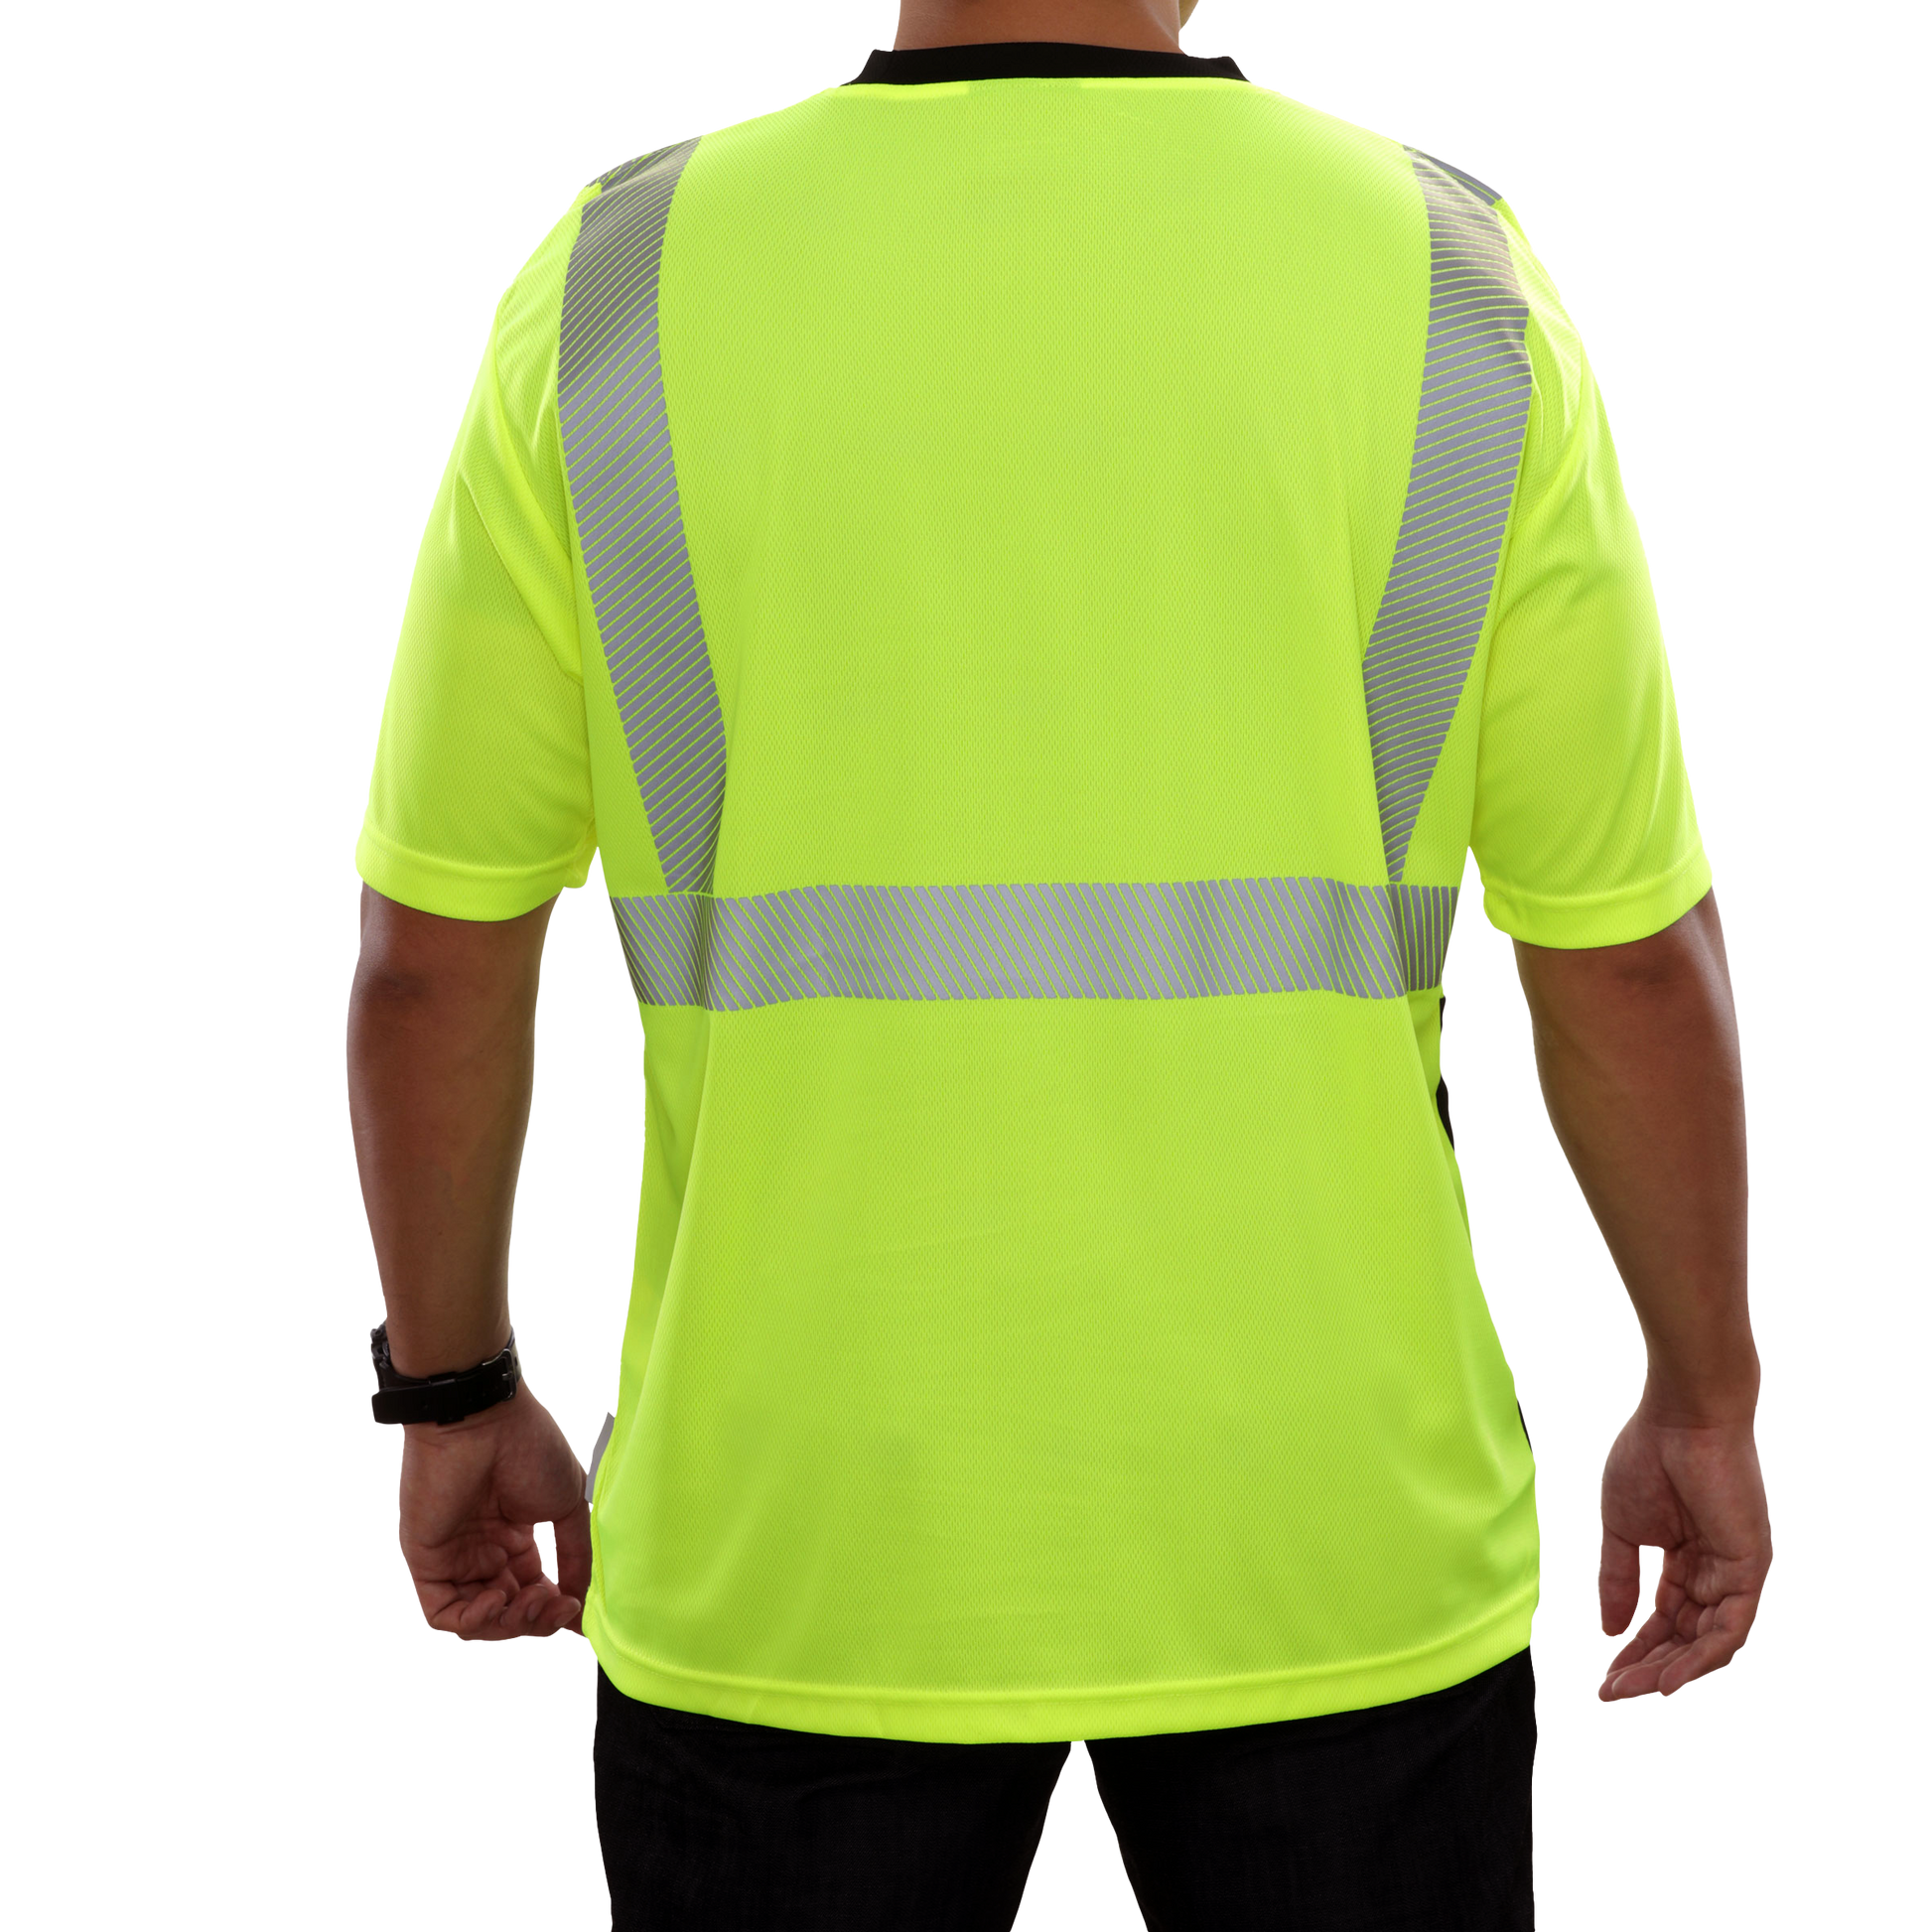 102CTLB Hi-Vis Two-Tone Birdseye Pocket Safety Shirt with Comfort Trim by 3MTM